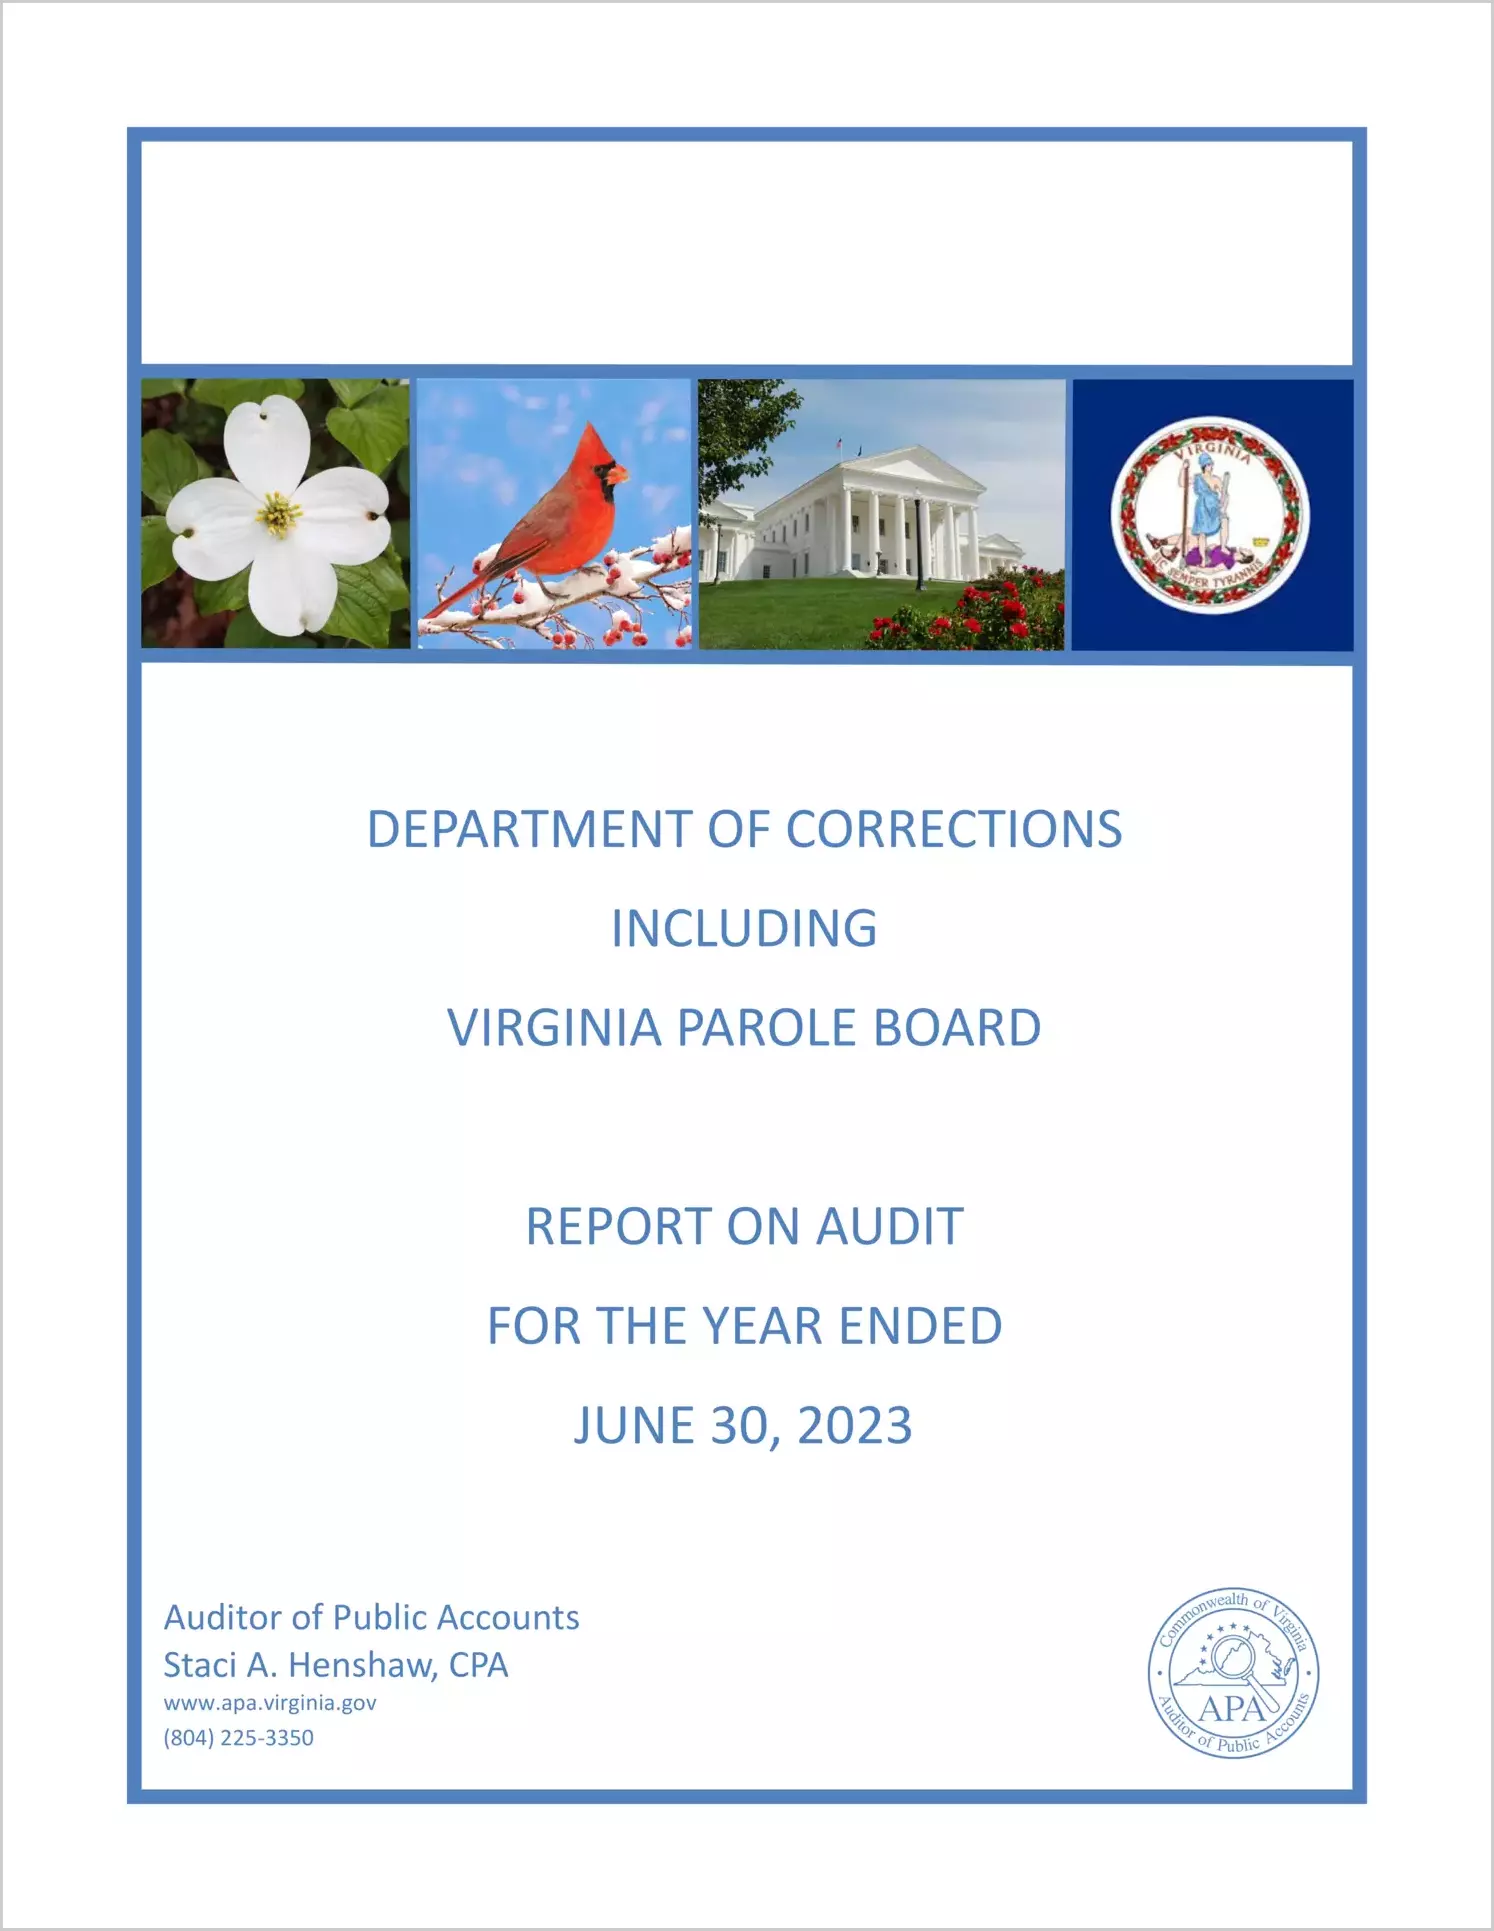 Department of Corrections Including Virginia Parole Board for the year ended June 30, 2023